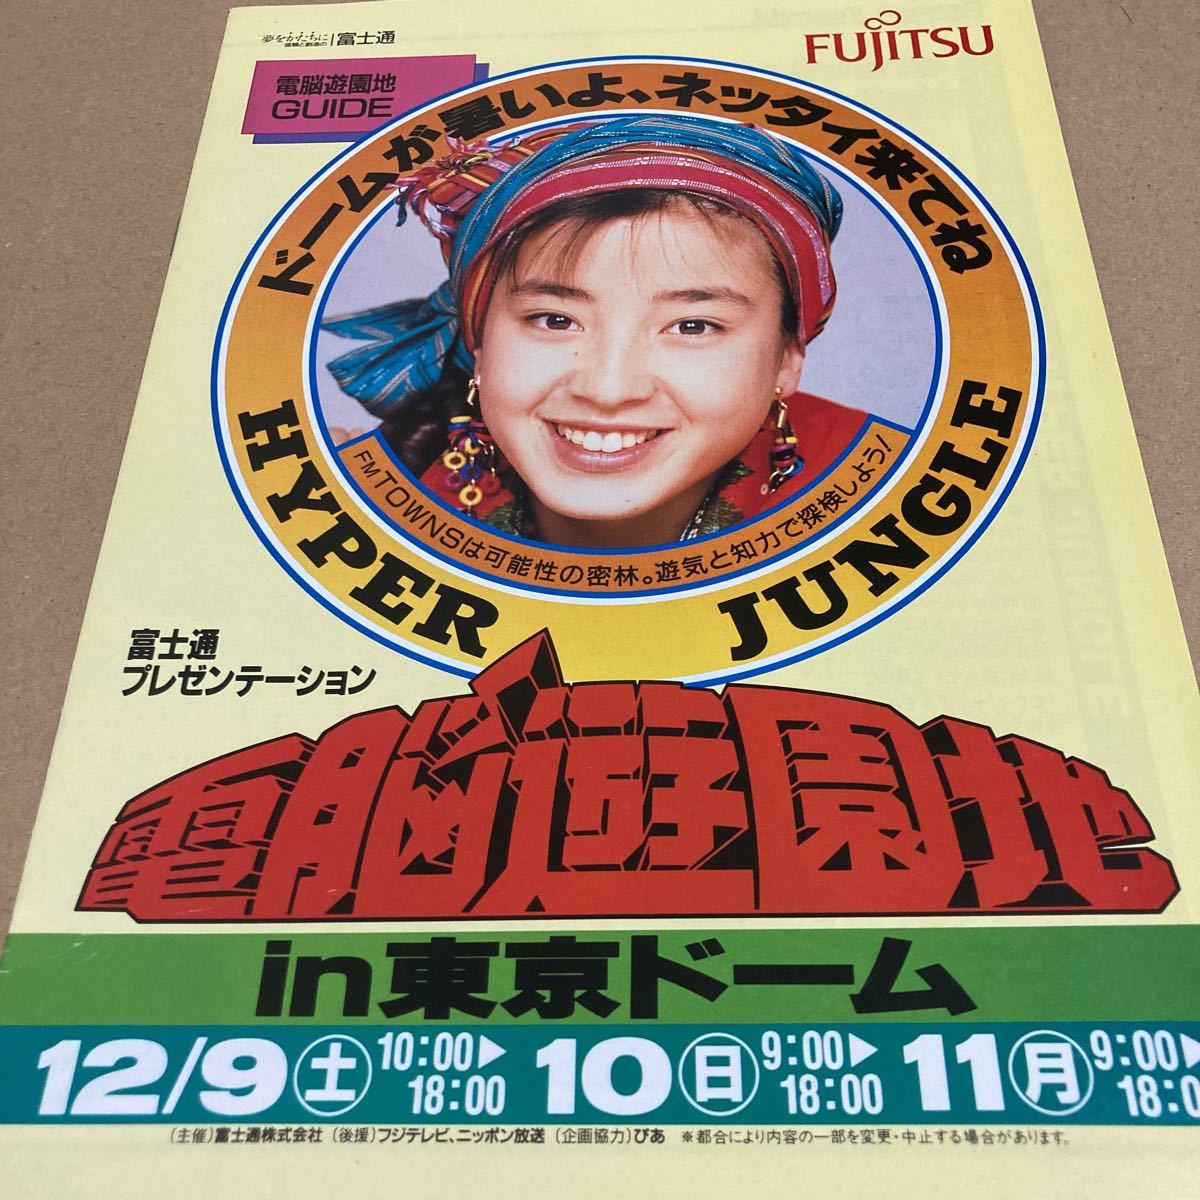  valuable : that time thing : approximately 30 year front. pamphlet Miyazawa Rie FM-TOWNS electronic brain amusement park free shipping Town z Fujitsu condition is year number. break up - clean. 